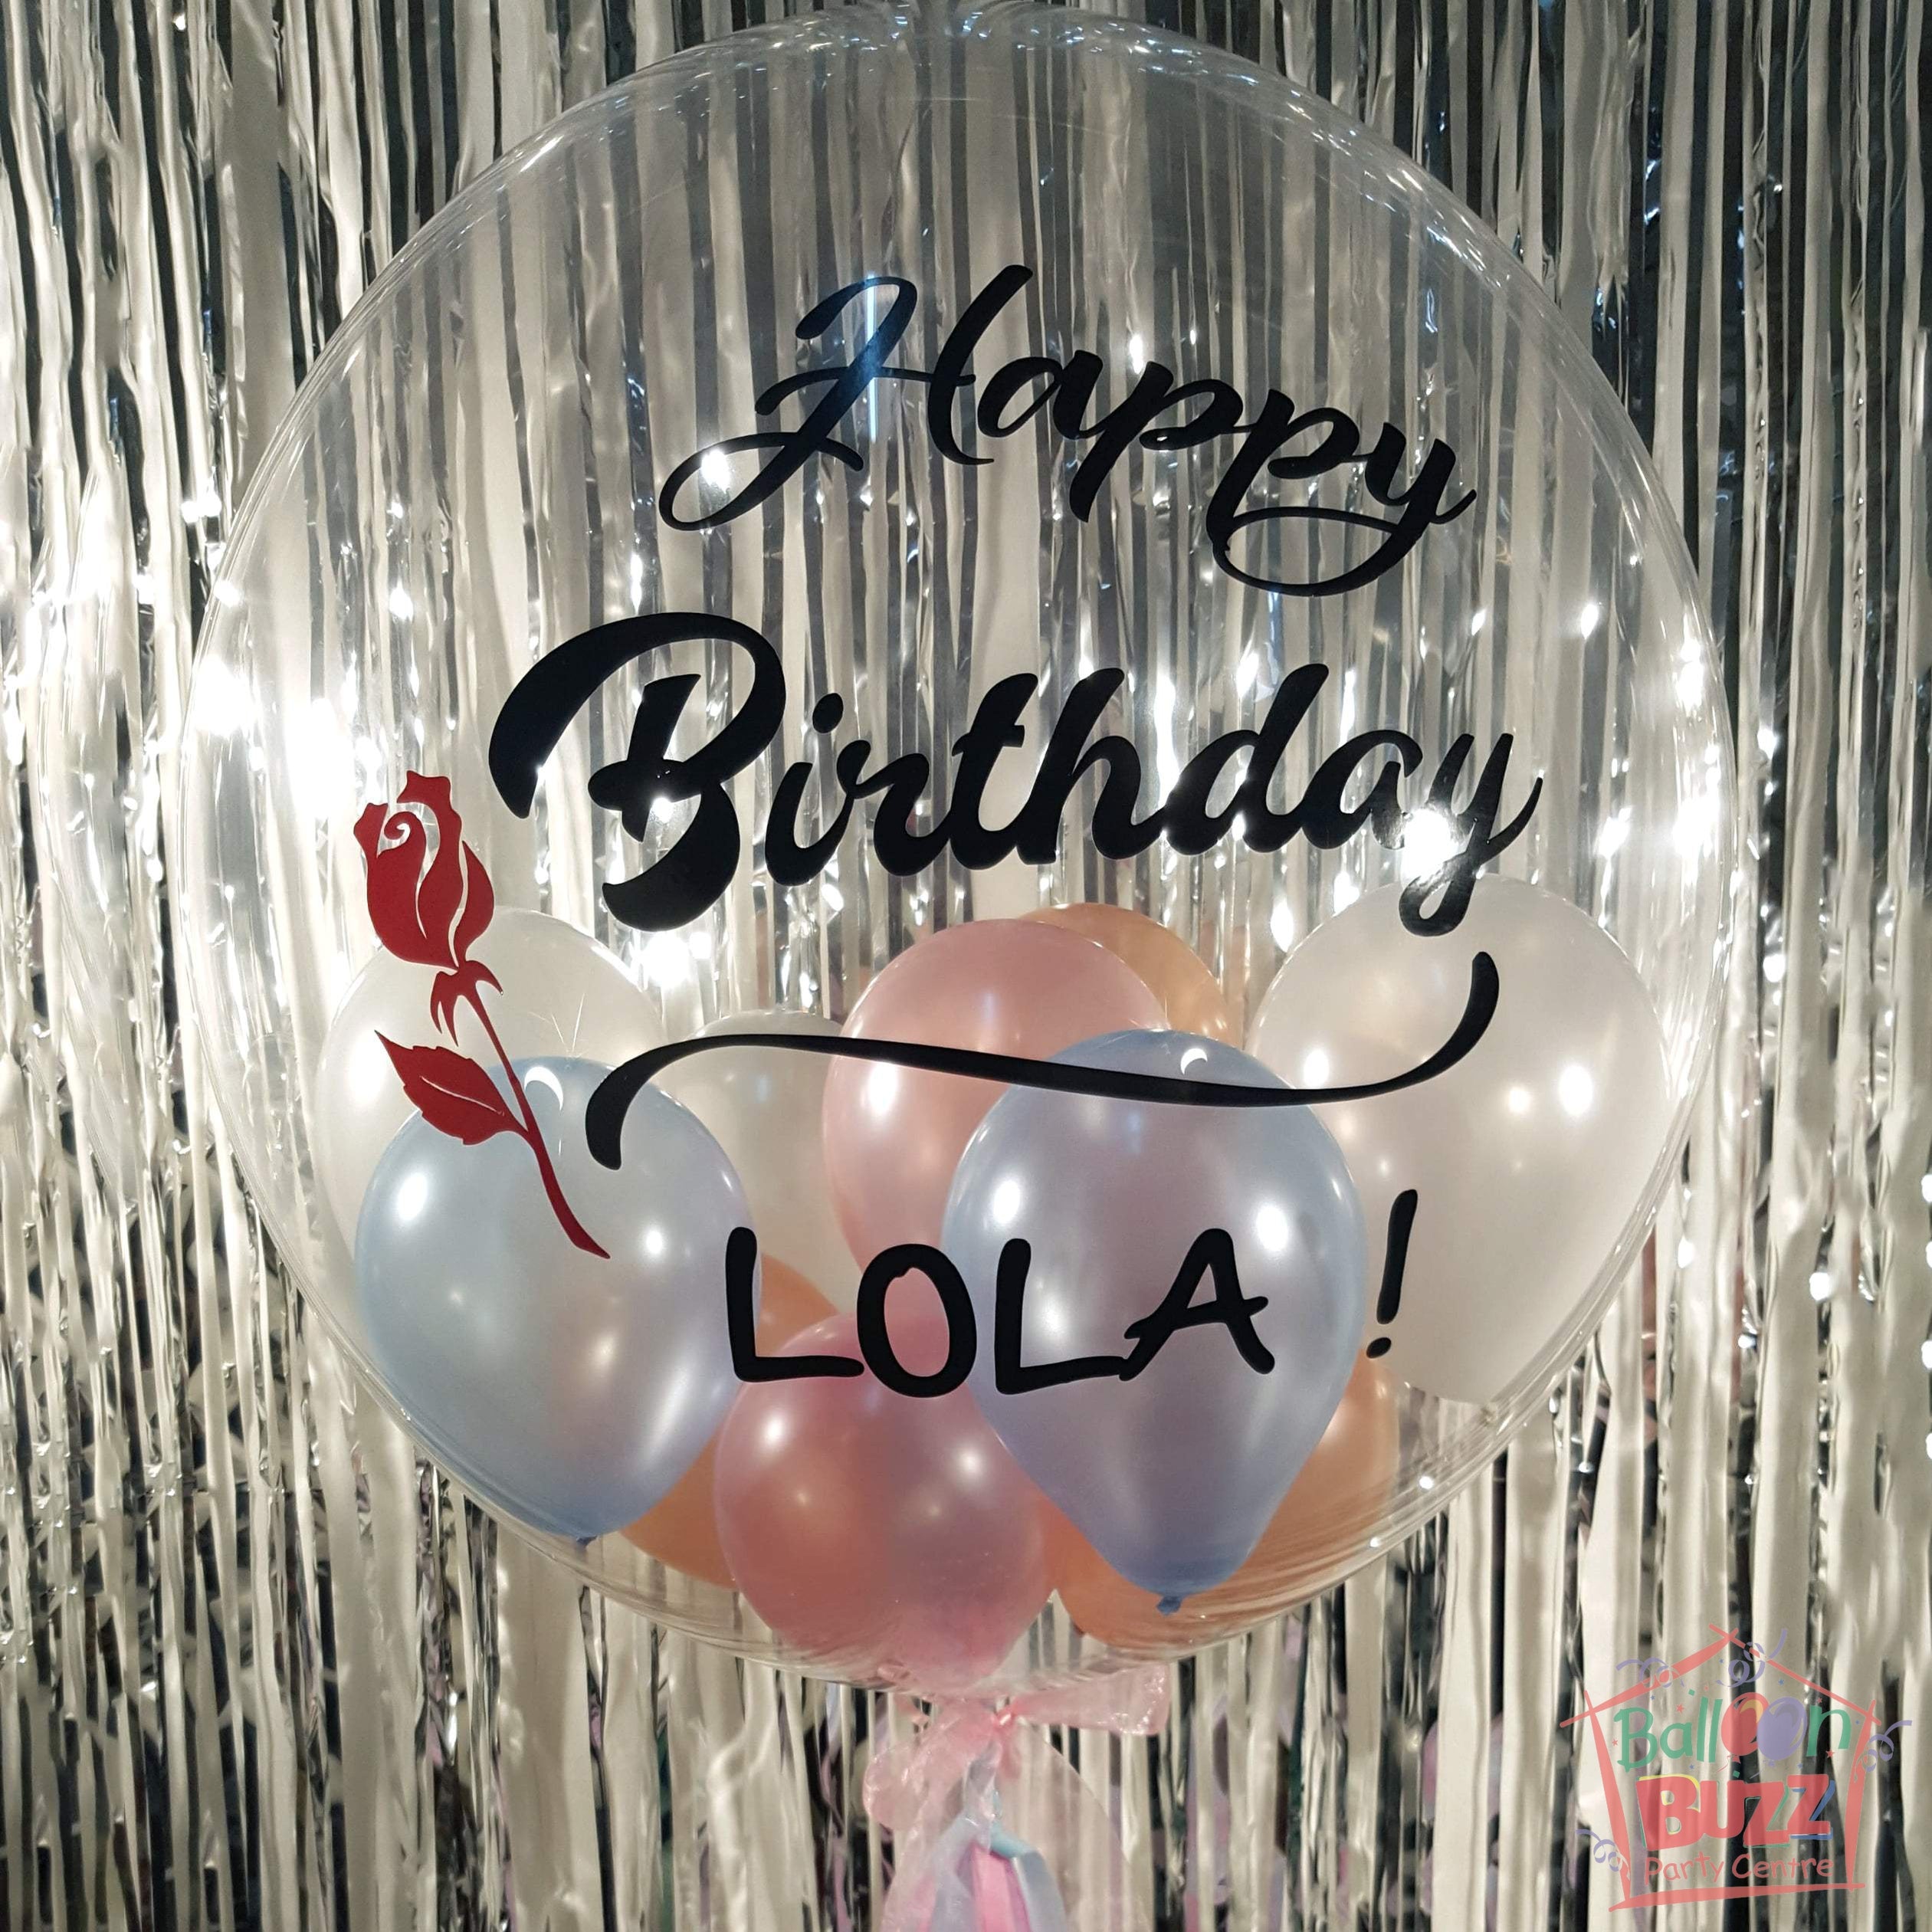 18-inch / 24-inch Personalized Balloons for Birthdays